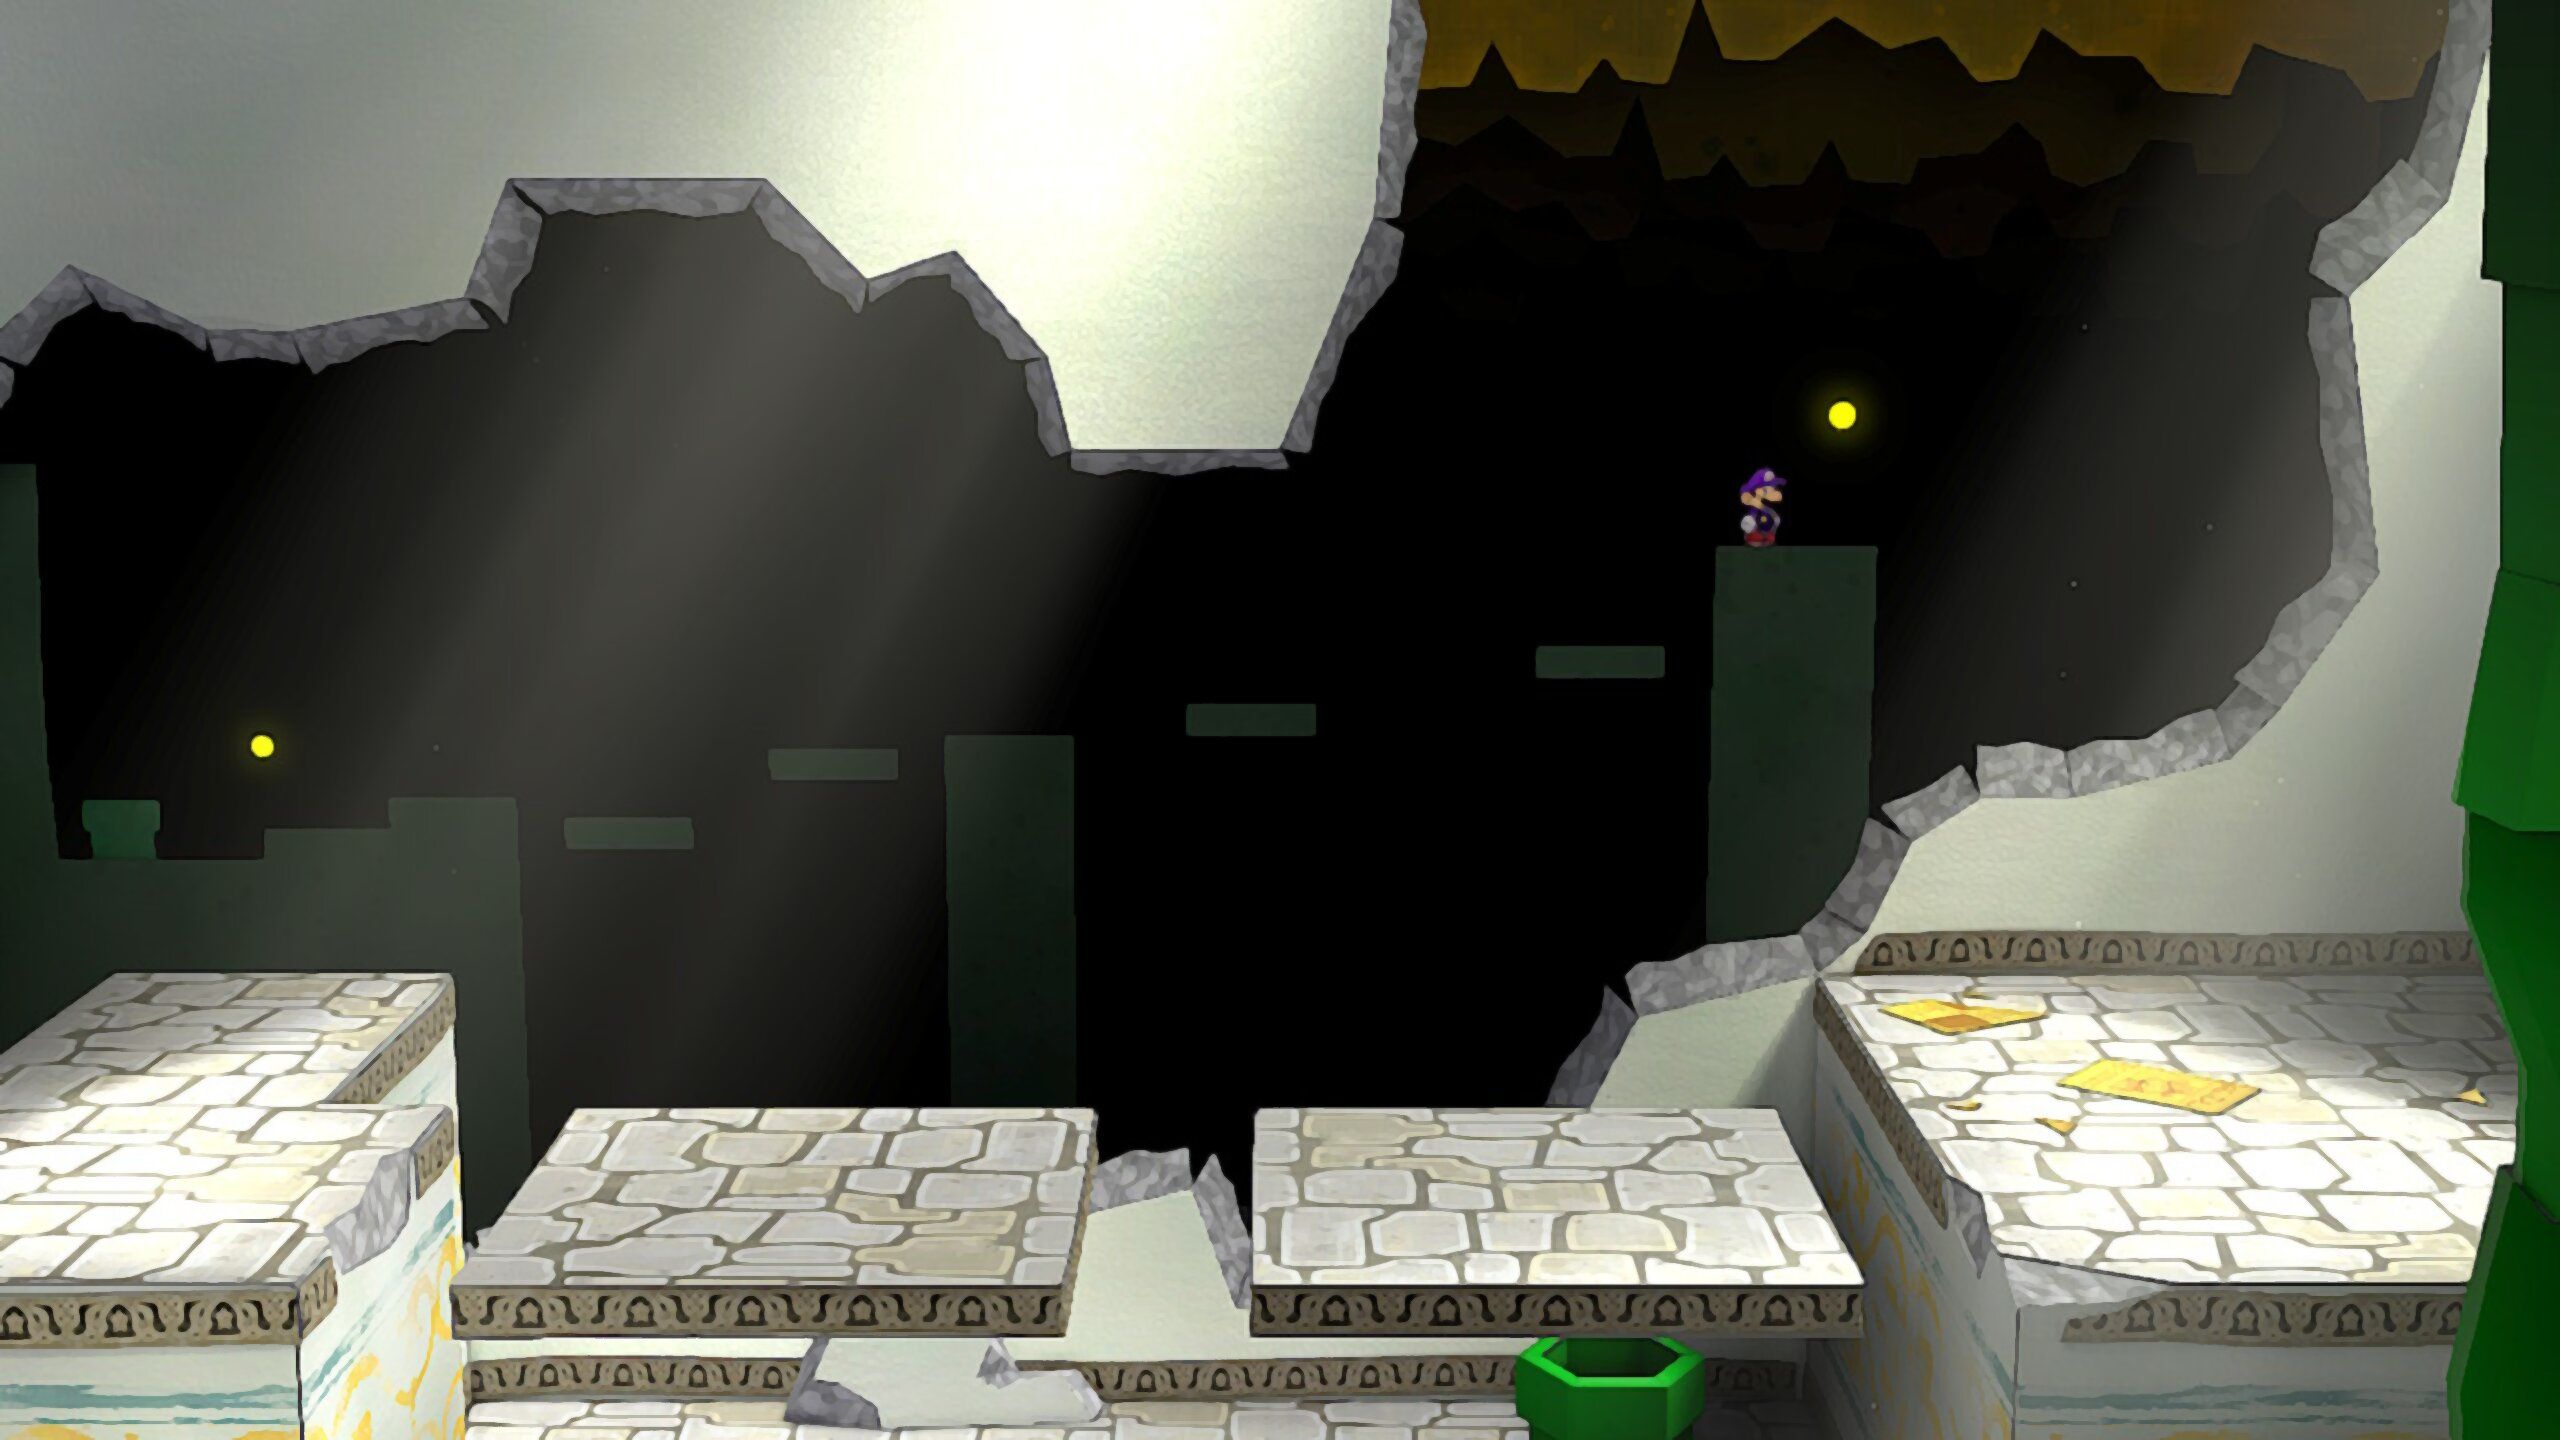 Image of the location of the star piece at the end of the hidden path in Paper Mario TTYD